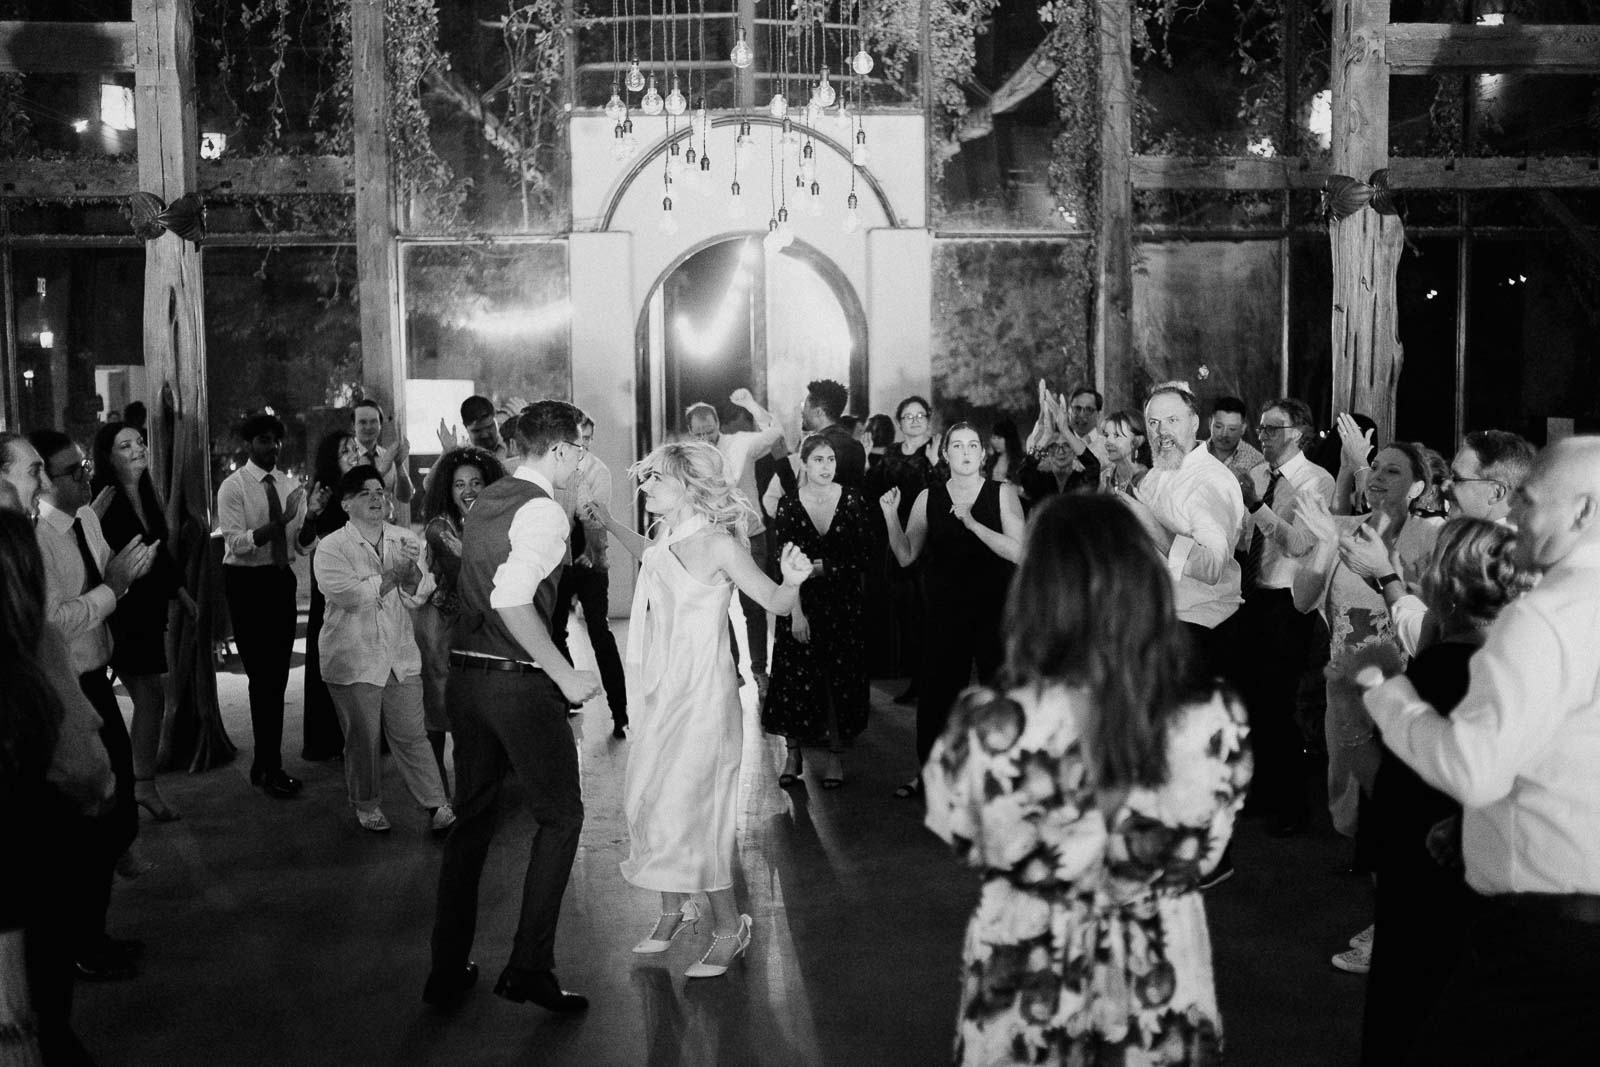 The couple dance the night away at Barr Mansion ballroom surrounded by friends and family